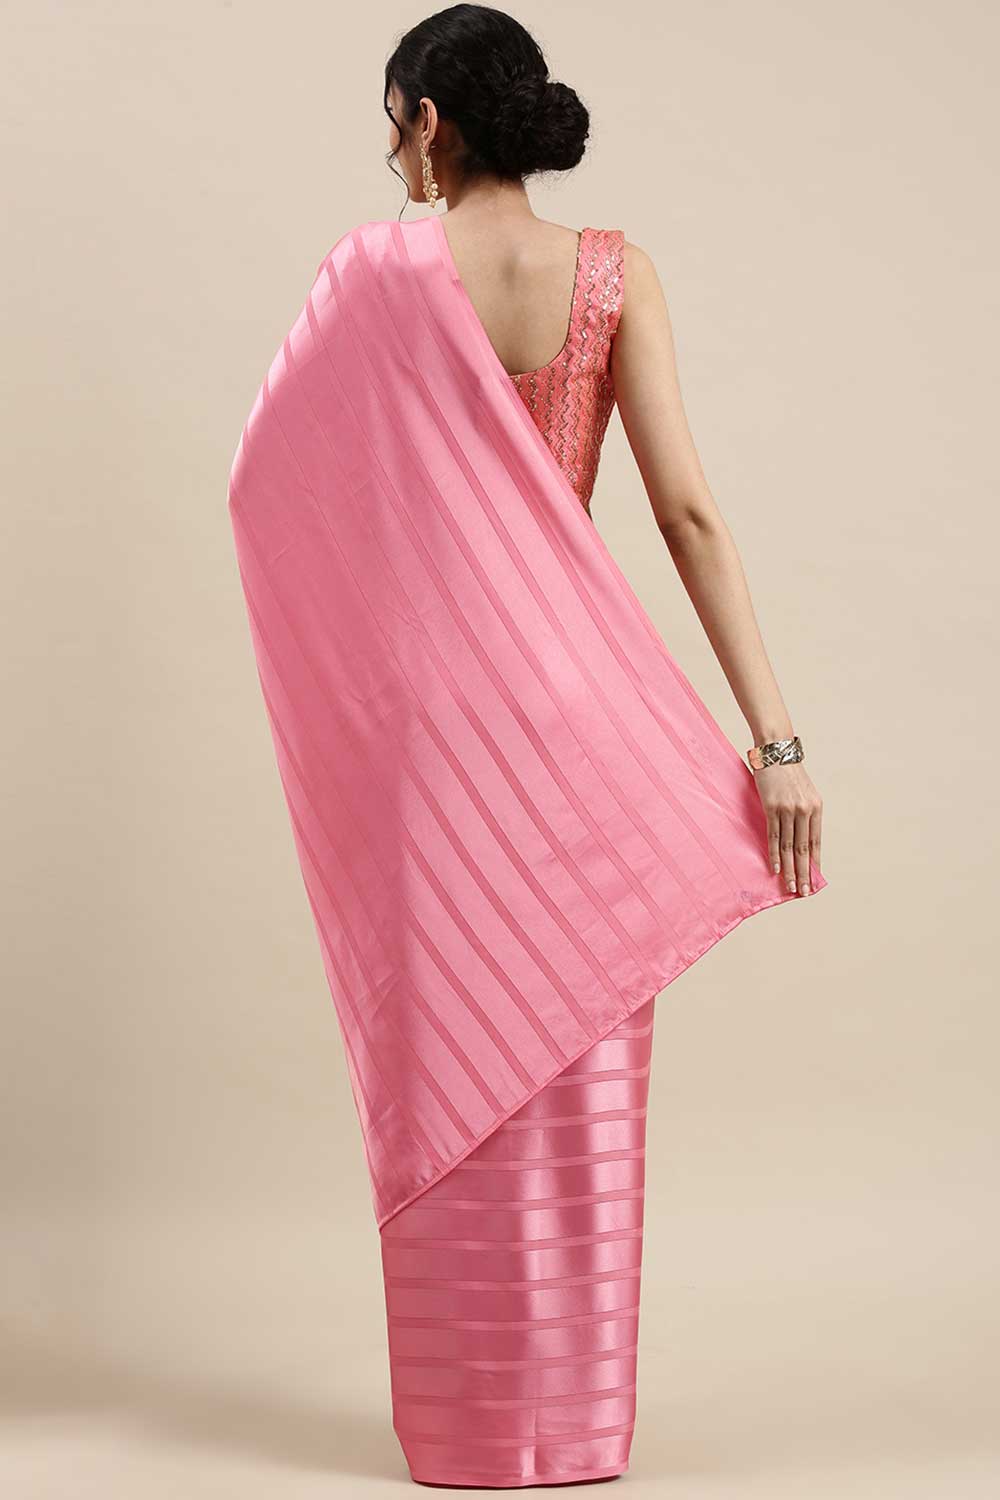 Buy Satin Striped Saree in Pink Online - Back